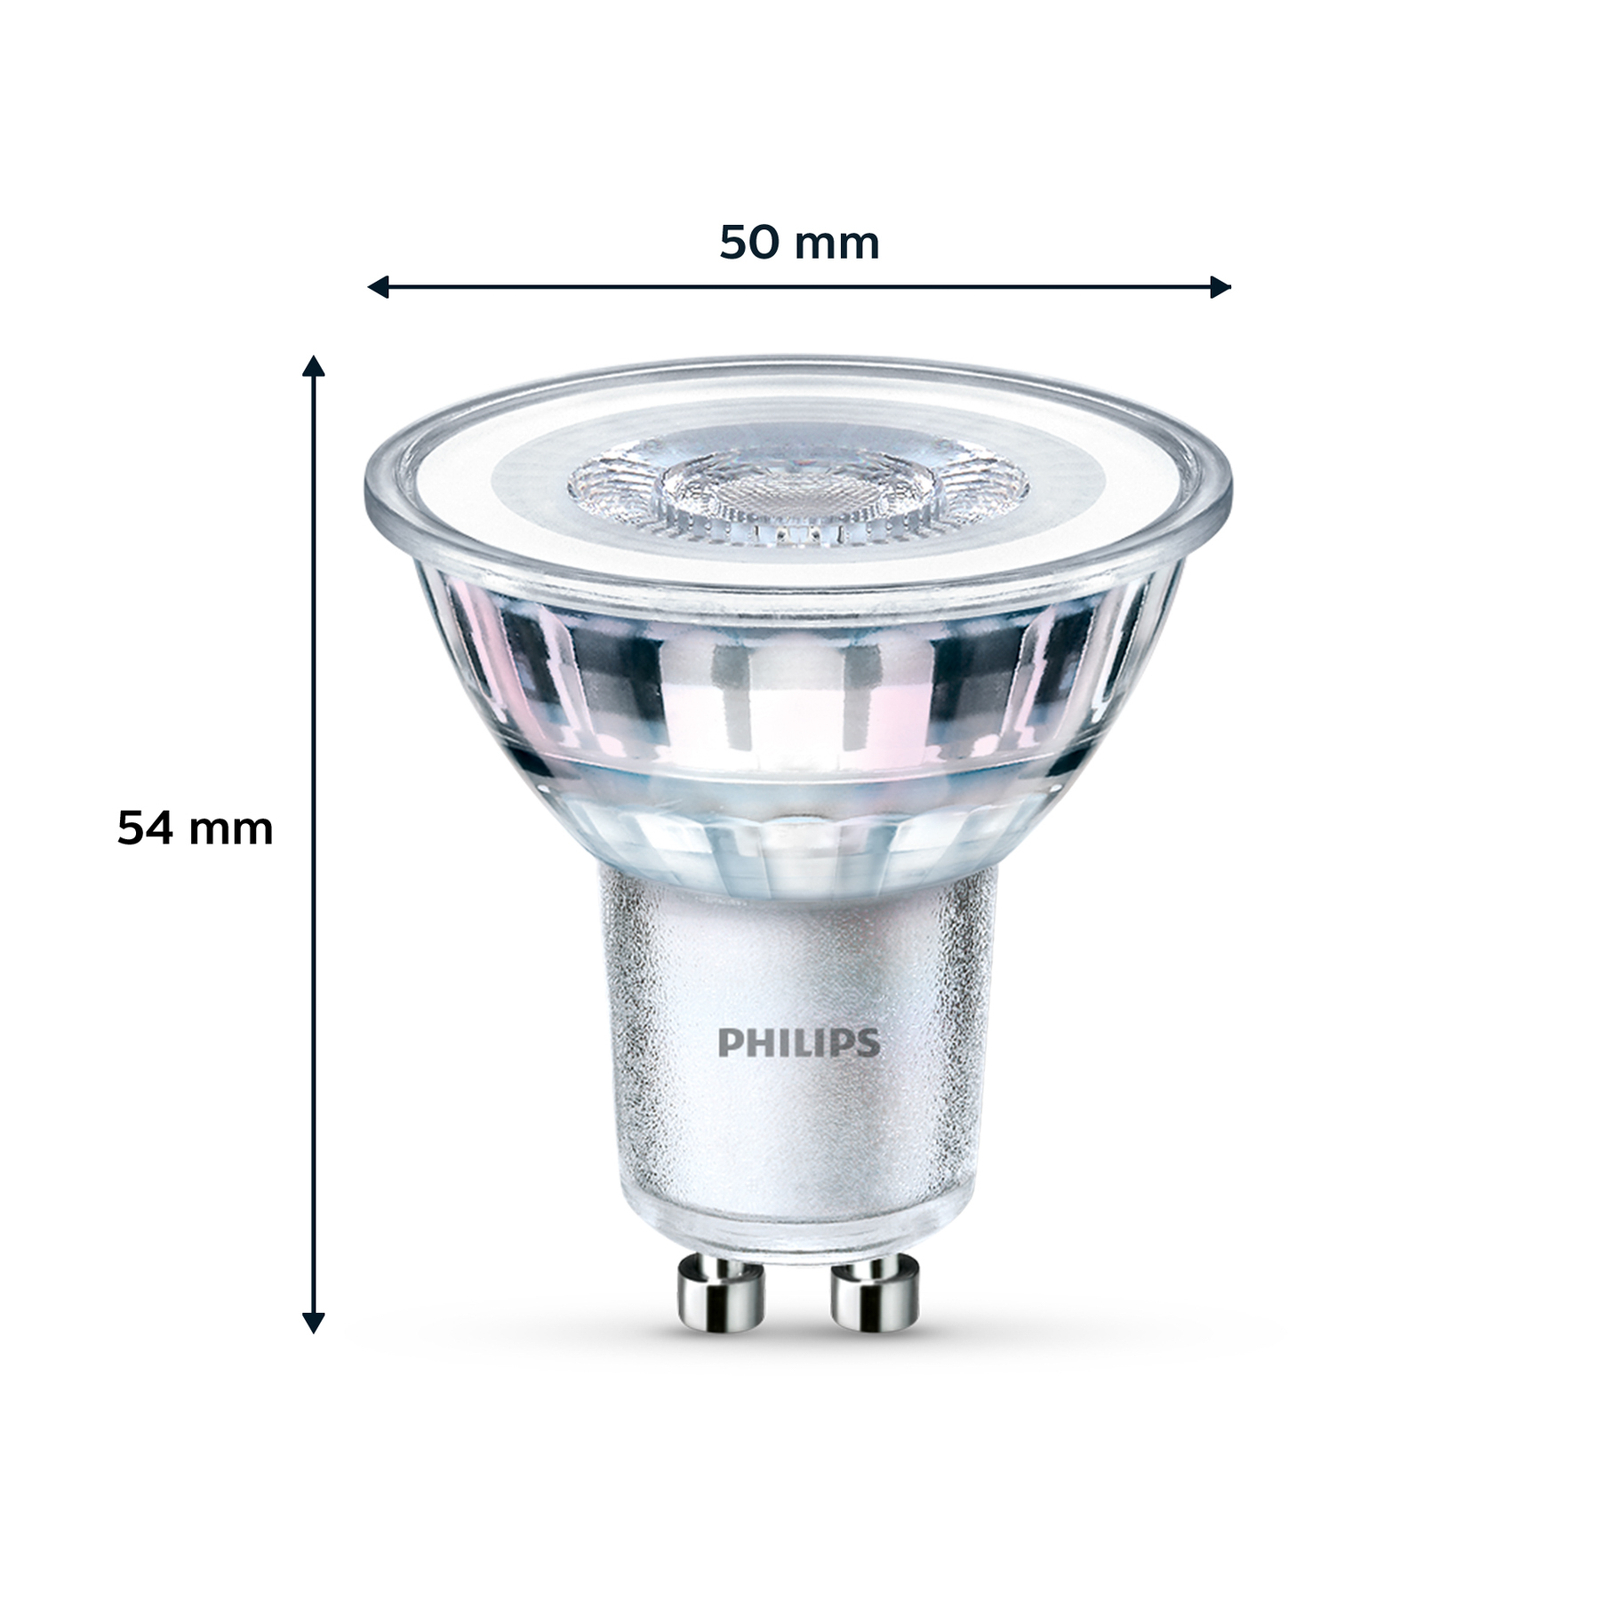 Philips LED GU10 3,5 W 275 lm 840 claire 36° x6